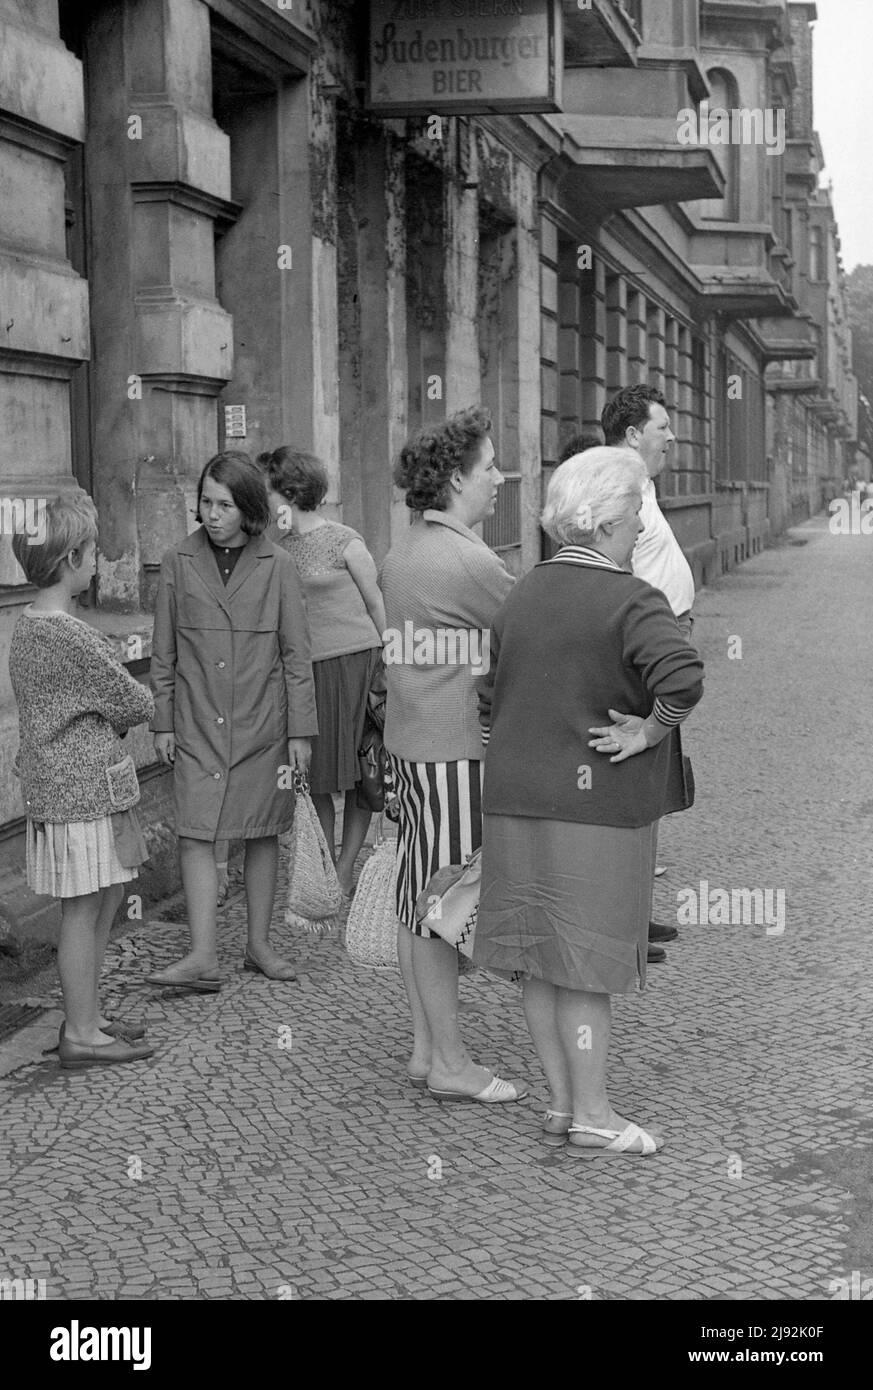 01.06.1967, Magdeburg, Magdeburg district, German Democratic Republic - People standing on a sidewalk. 00S670601D327CAROEX.JPG [MODEL RELEASE: NO, PRO Stock Photo